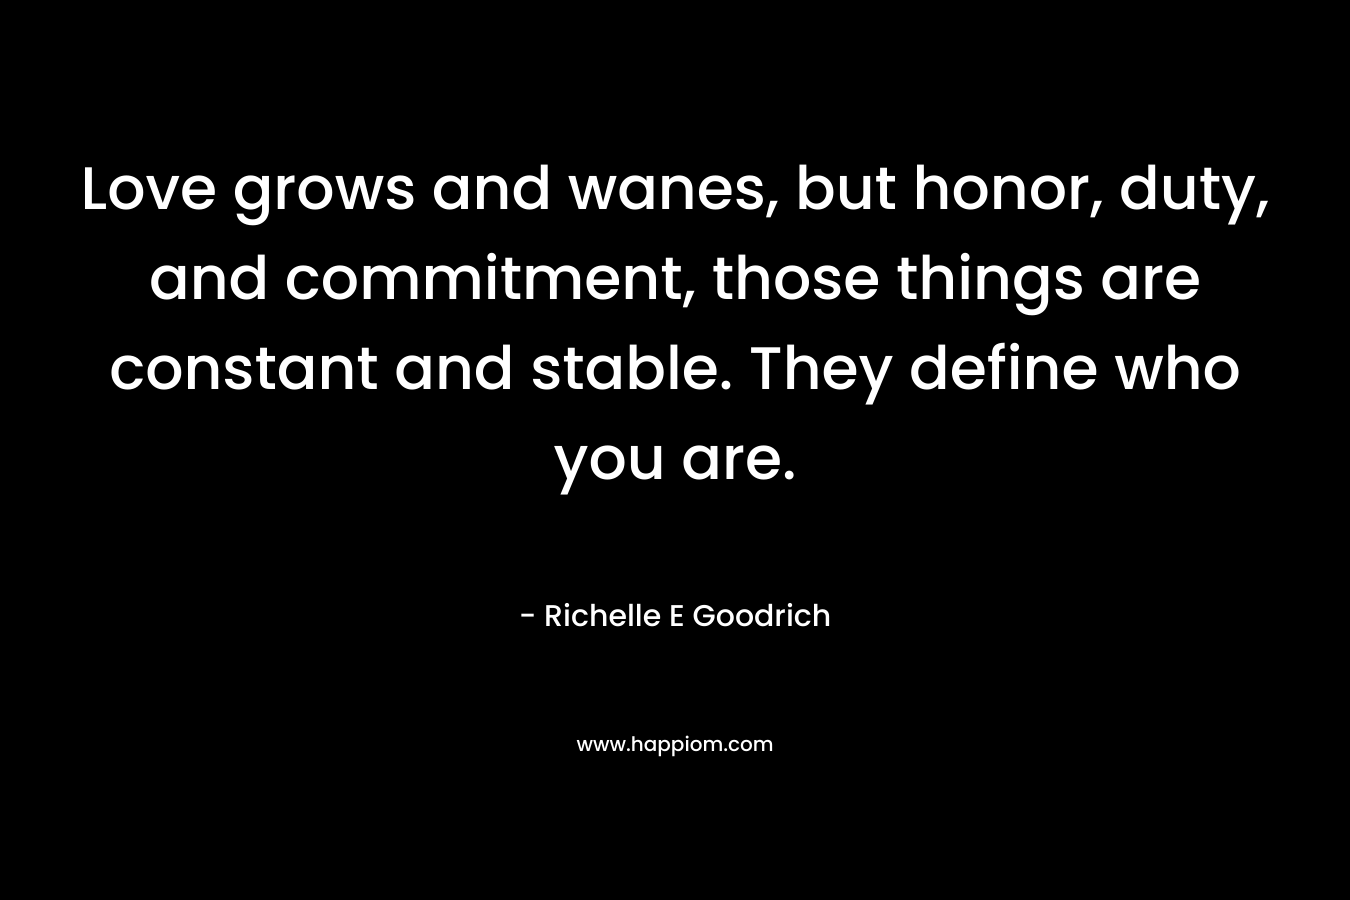 Love grows and wanes, but honor, duty, and commitment, those things are constant and stable. They define who you are. – Richelle E Goodrich